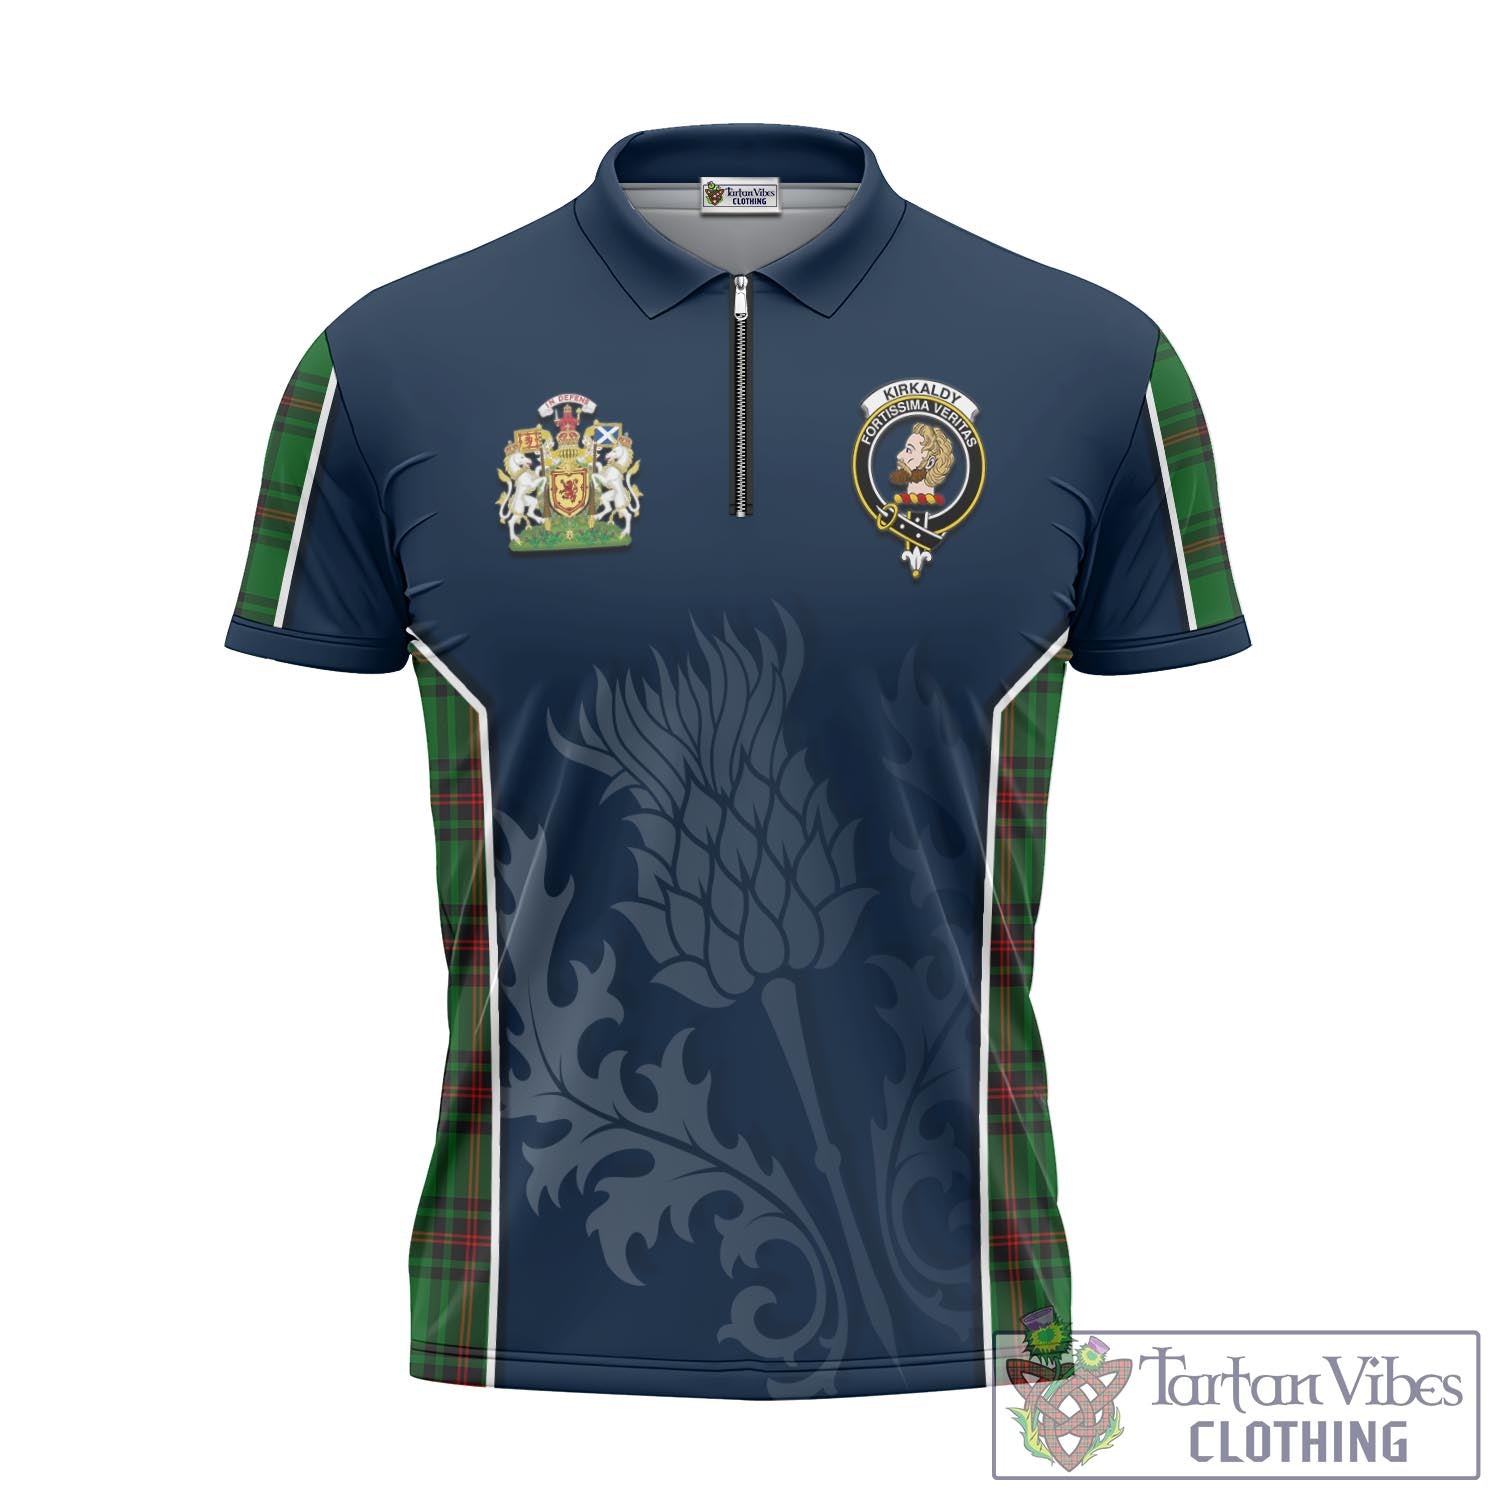 Tartan Vibes Clothing Kirkaldy Tartan Zipper Polo Shirt with Family Crest and Scottish Thistle Vibes Sport Style